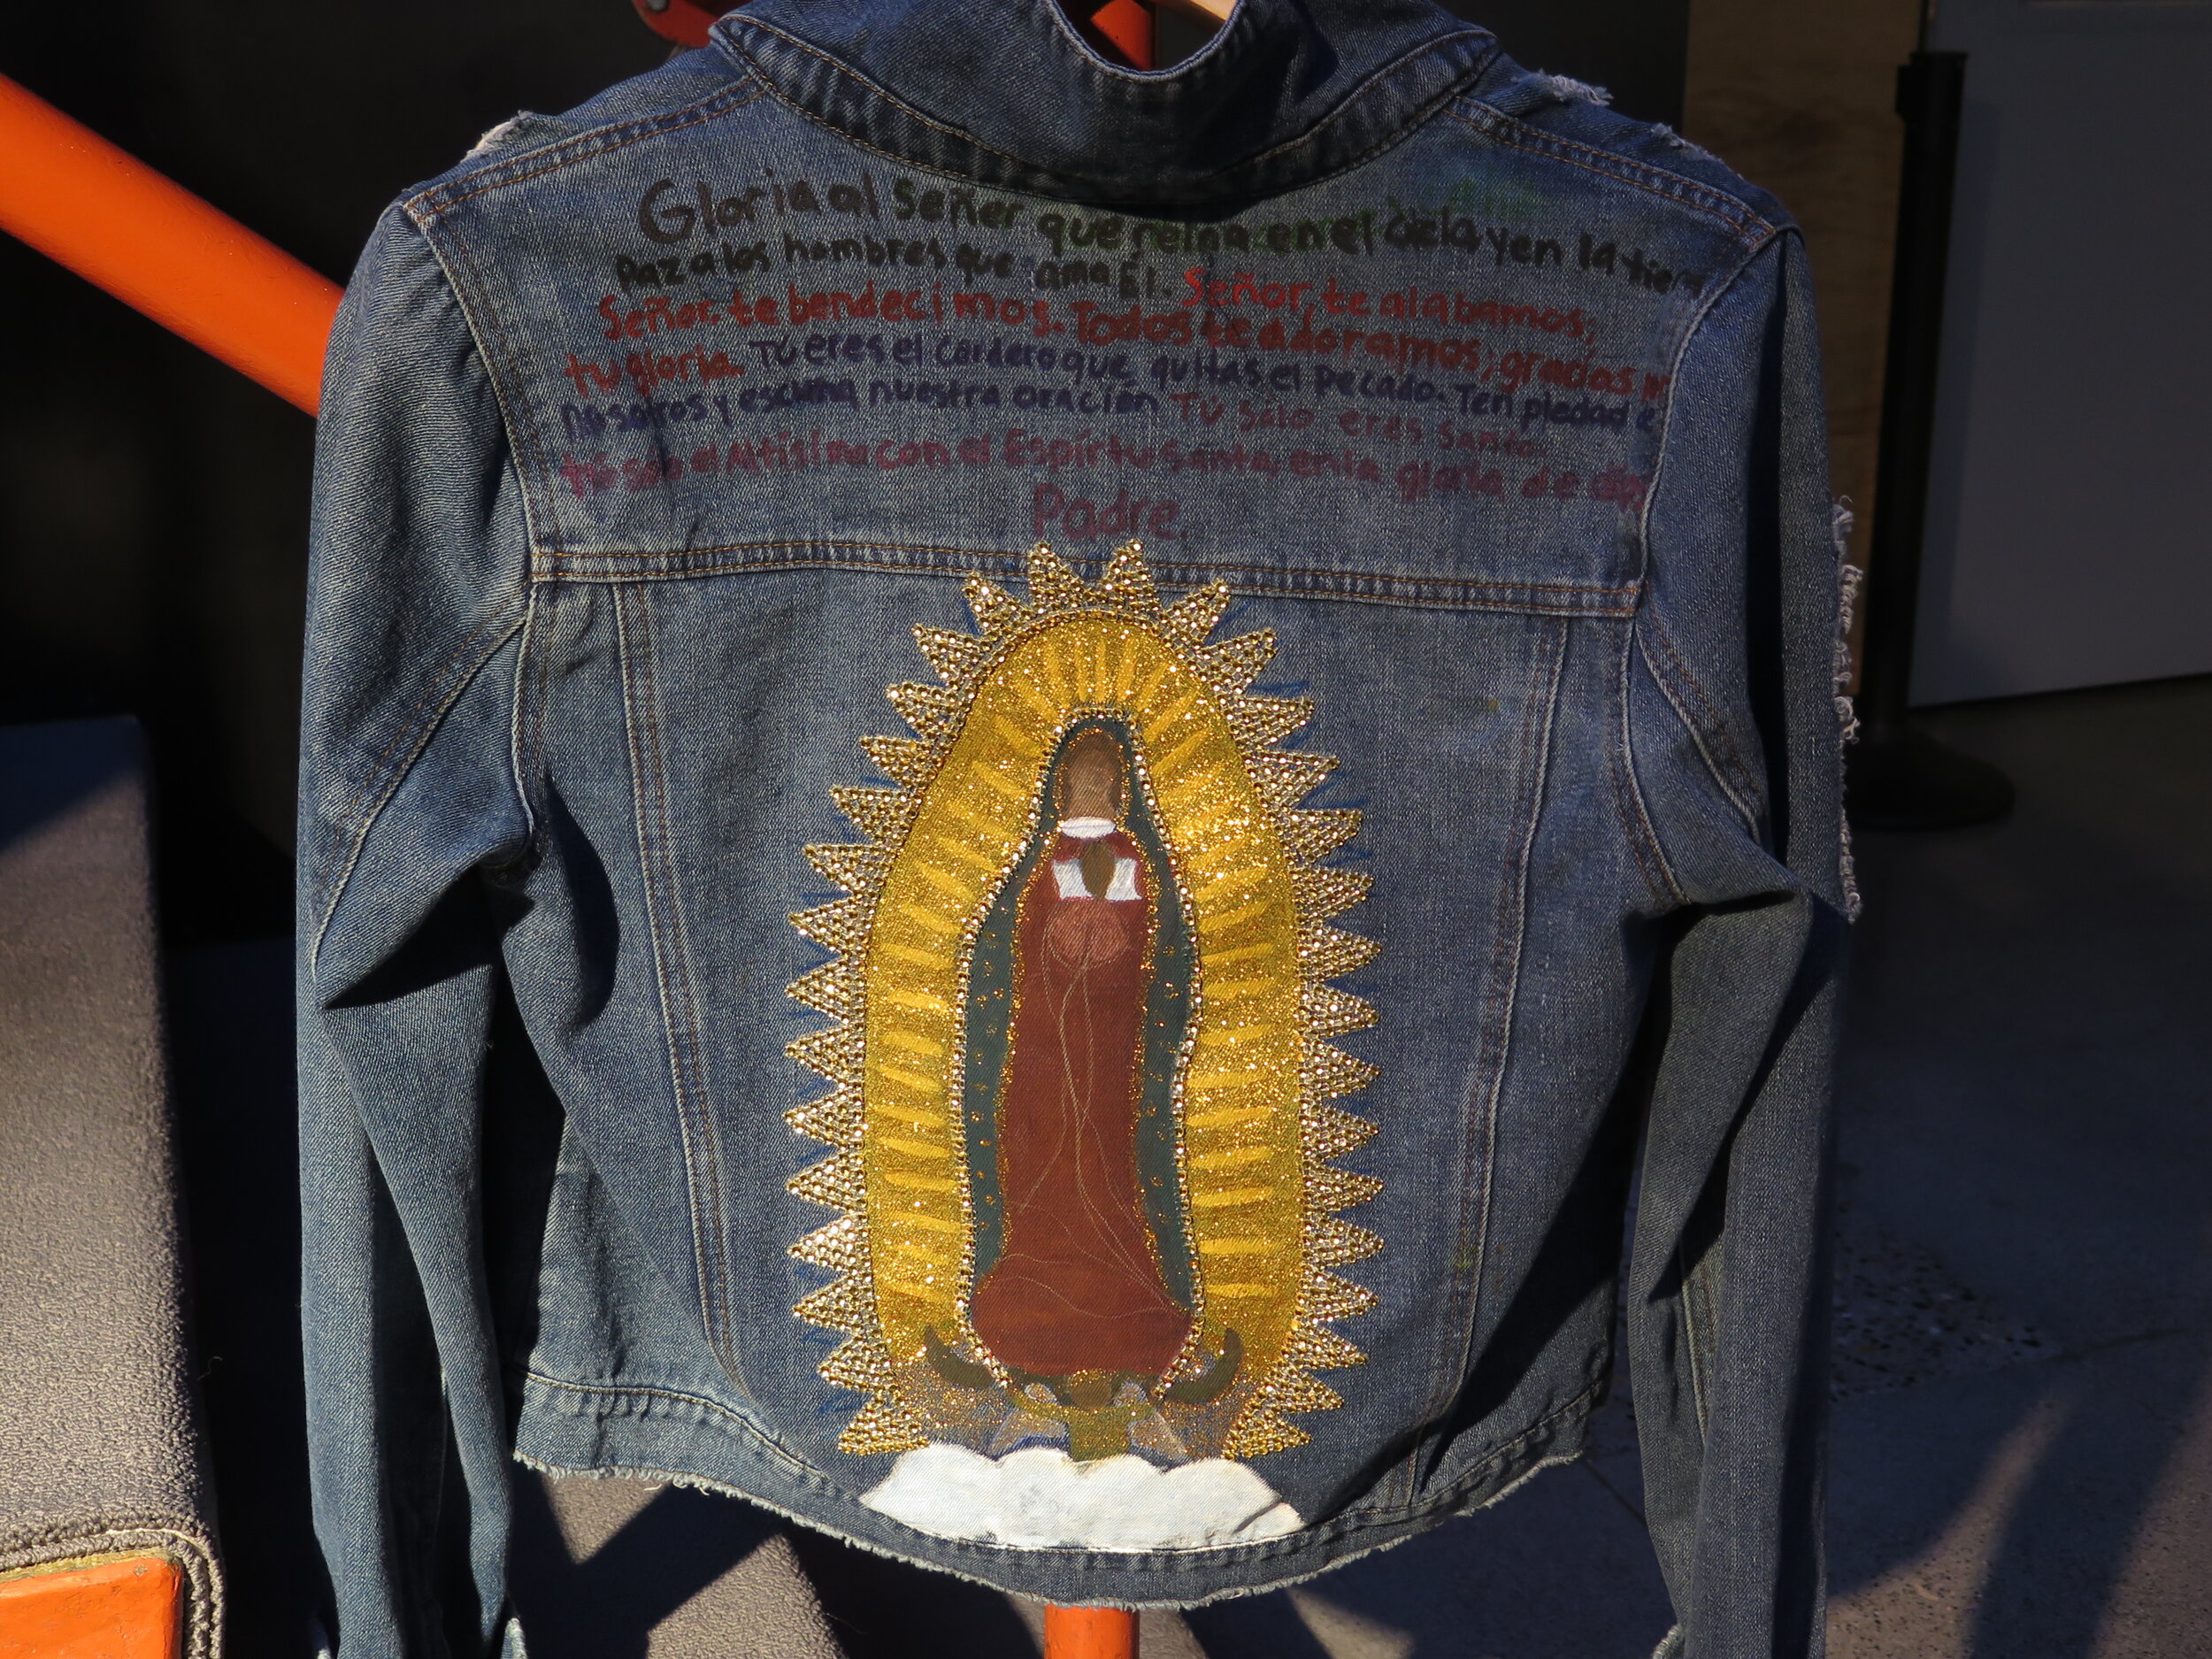 Untitled (Virgin Mary Jacket) by Iridian Sanchez